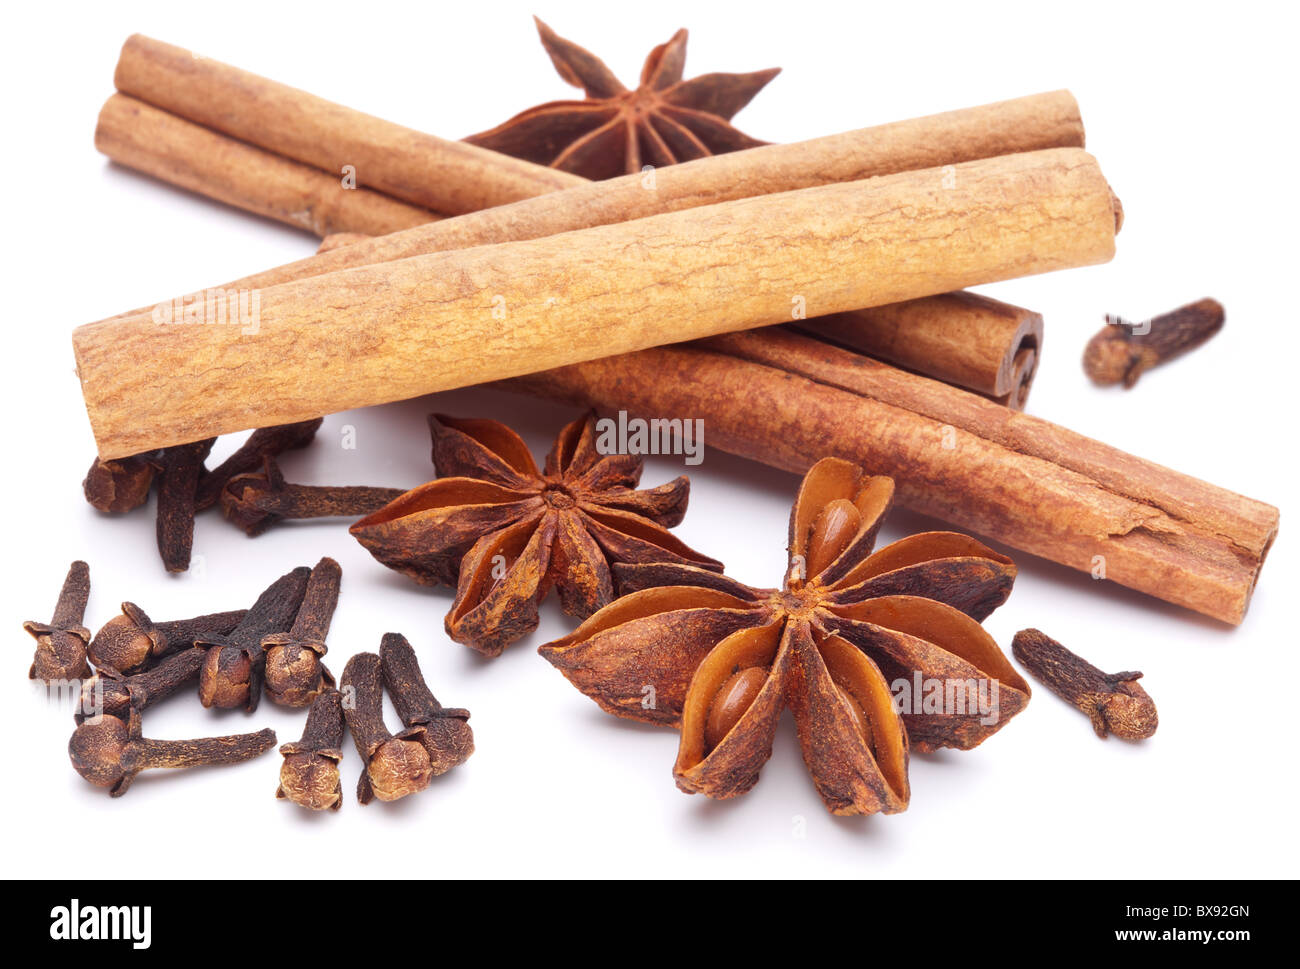 Cloves, anise and cinnamon isolated on white background. Stock Photo